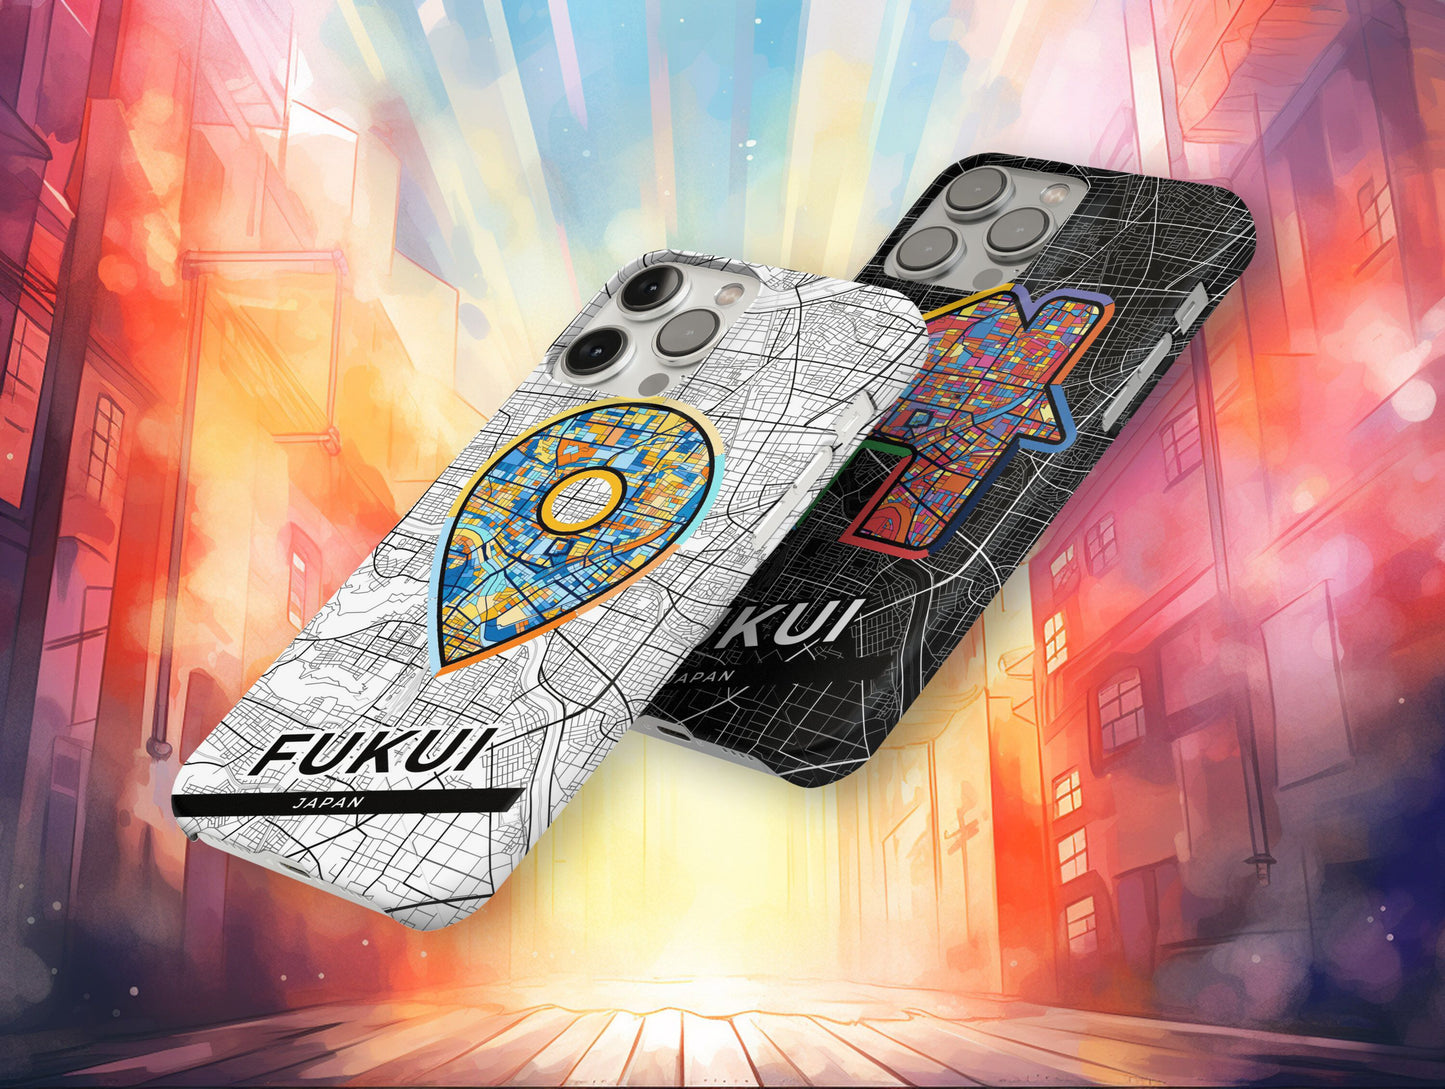 Fukui Japan slim phone case with colorful icon. Birthday, wedding or housewarming gift. Couple match cases.